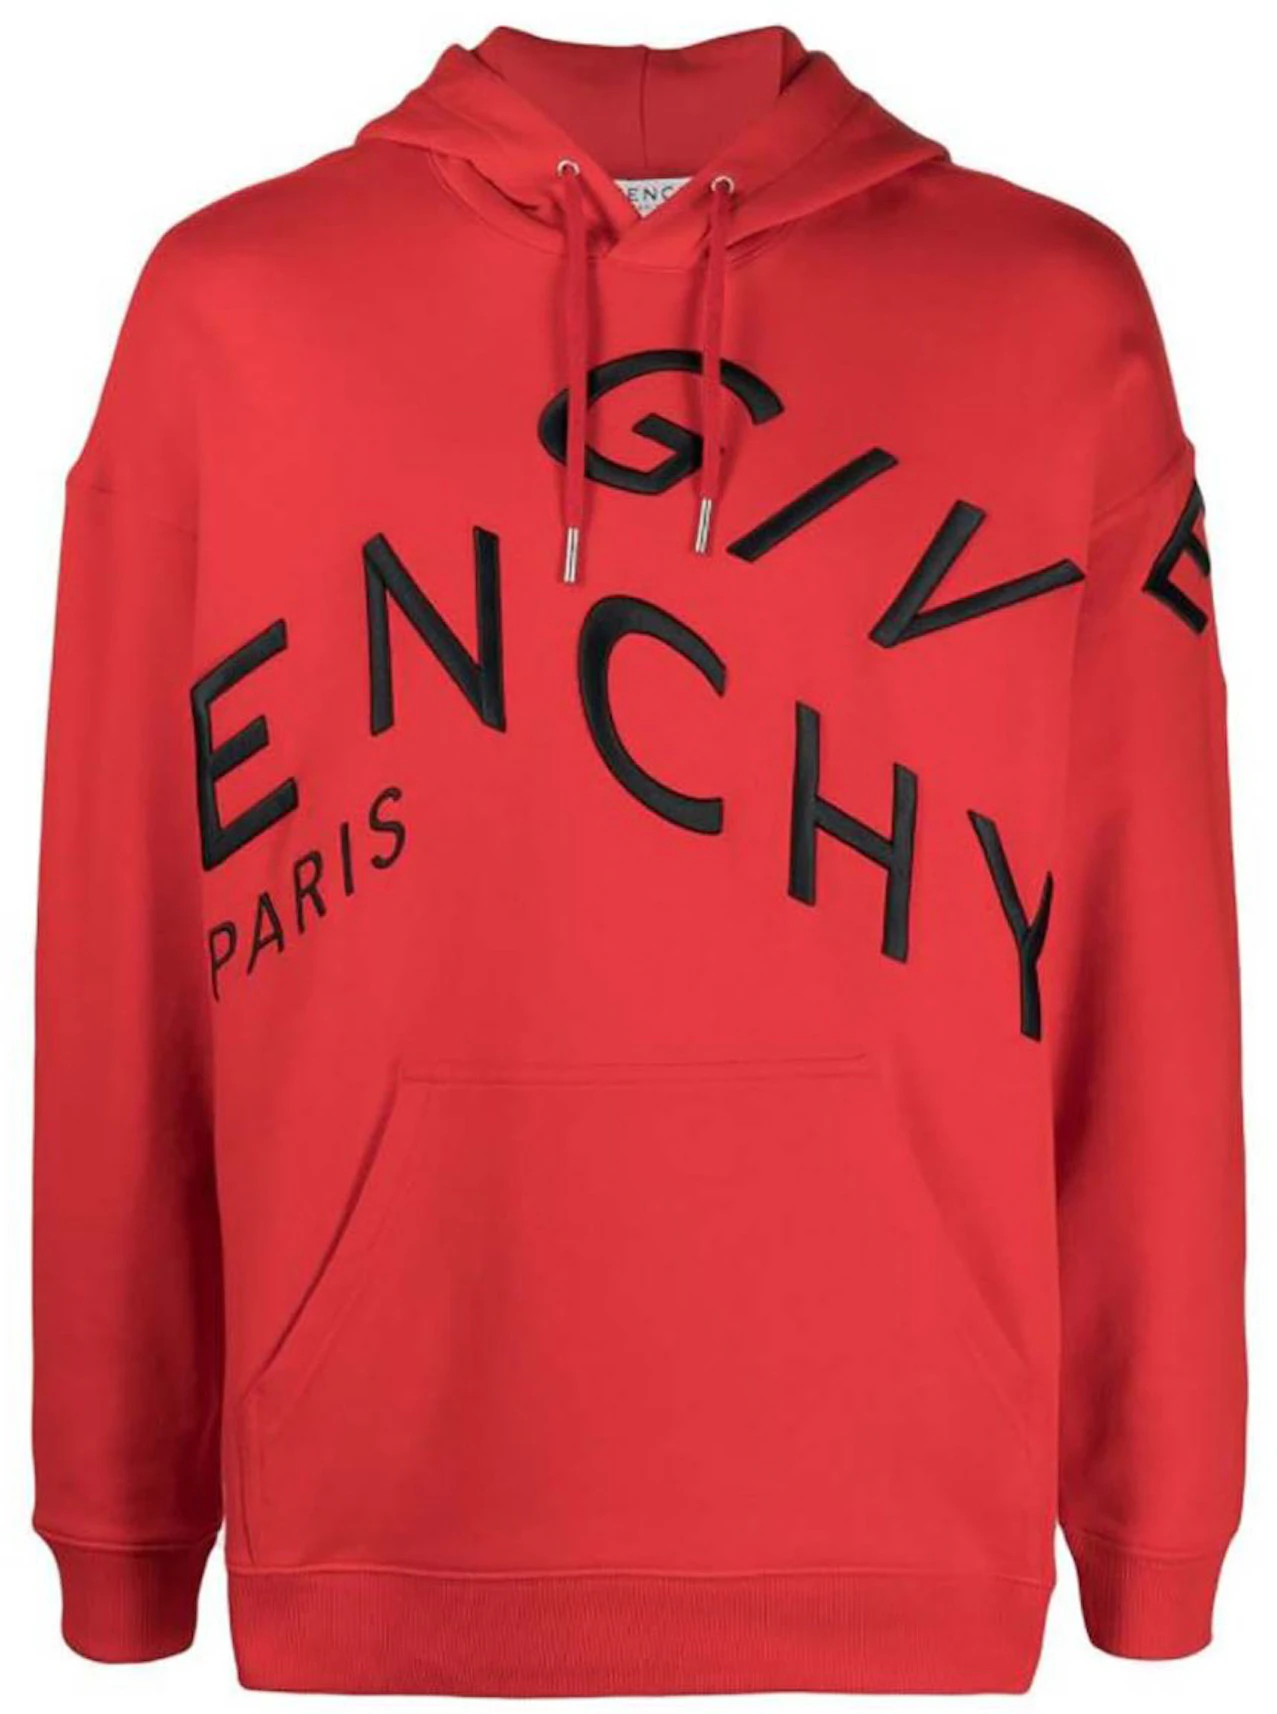 Givenchy Refracted Embroidered Logo Hoodie Red/Black - US